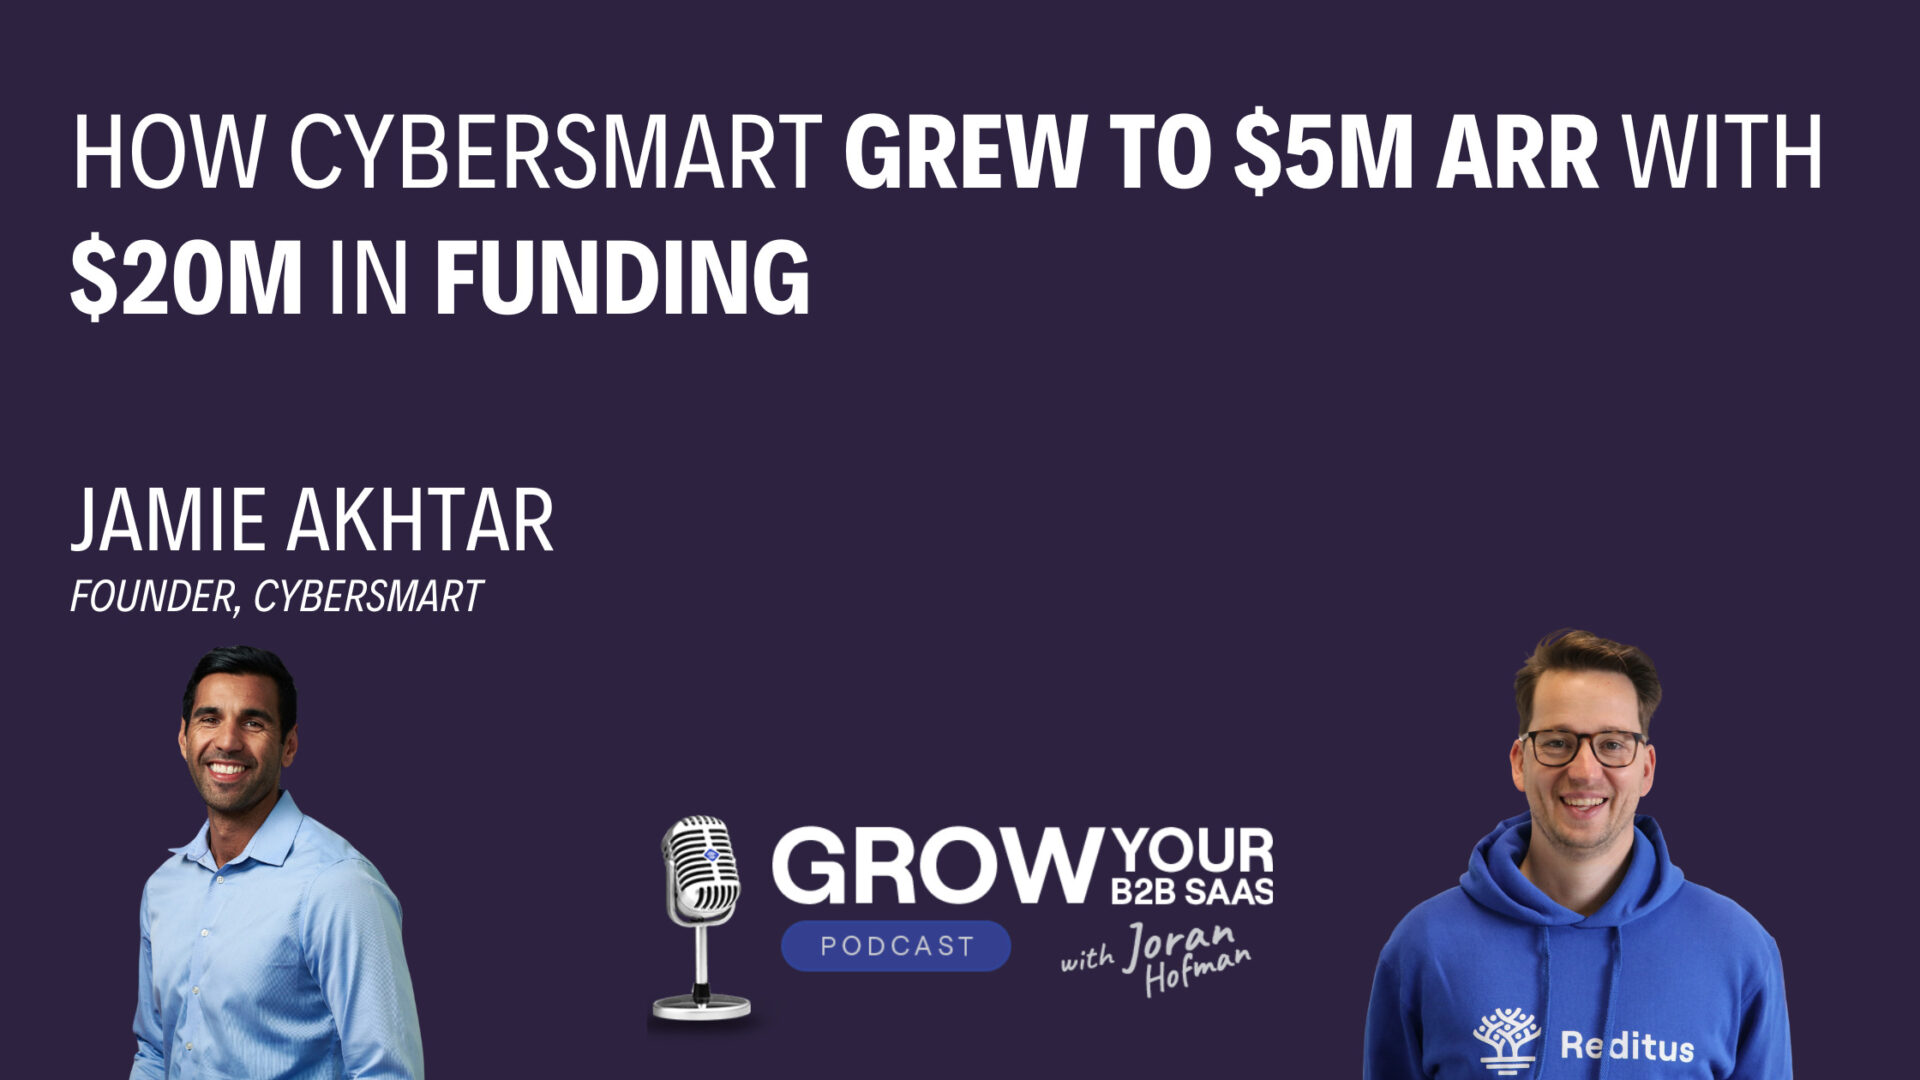 https://www.getreditus.com/podcast/s4e2-how-cybersmart-grew-to-5m-arr-with-20m-in-funding-with-jamie-akhtar/